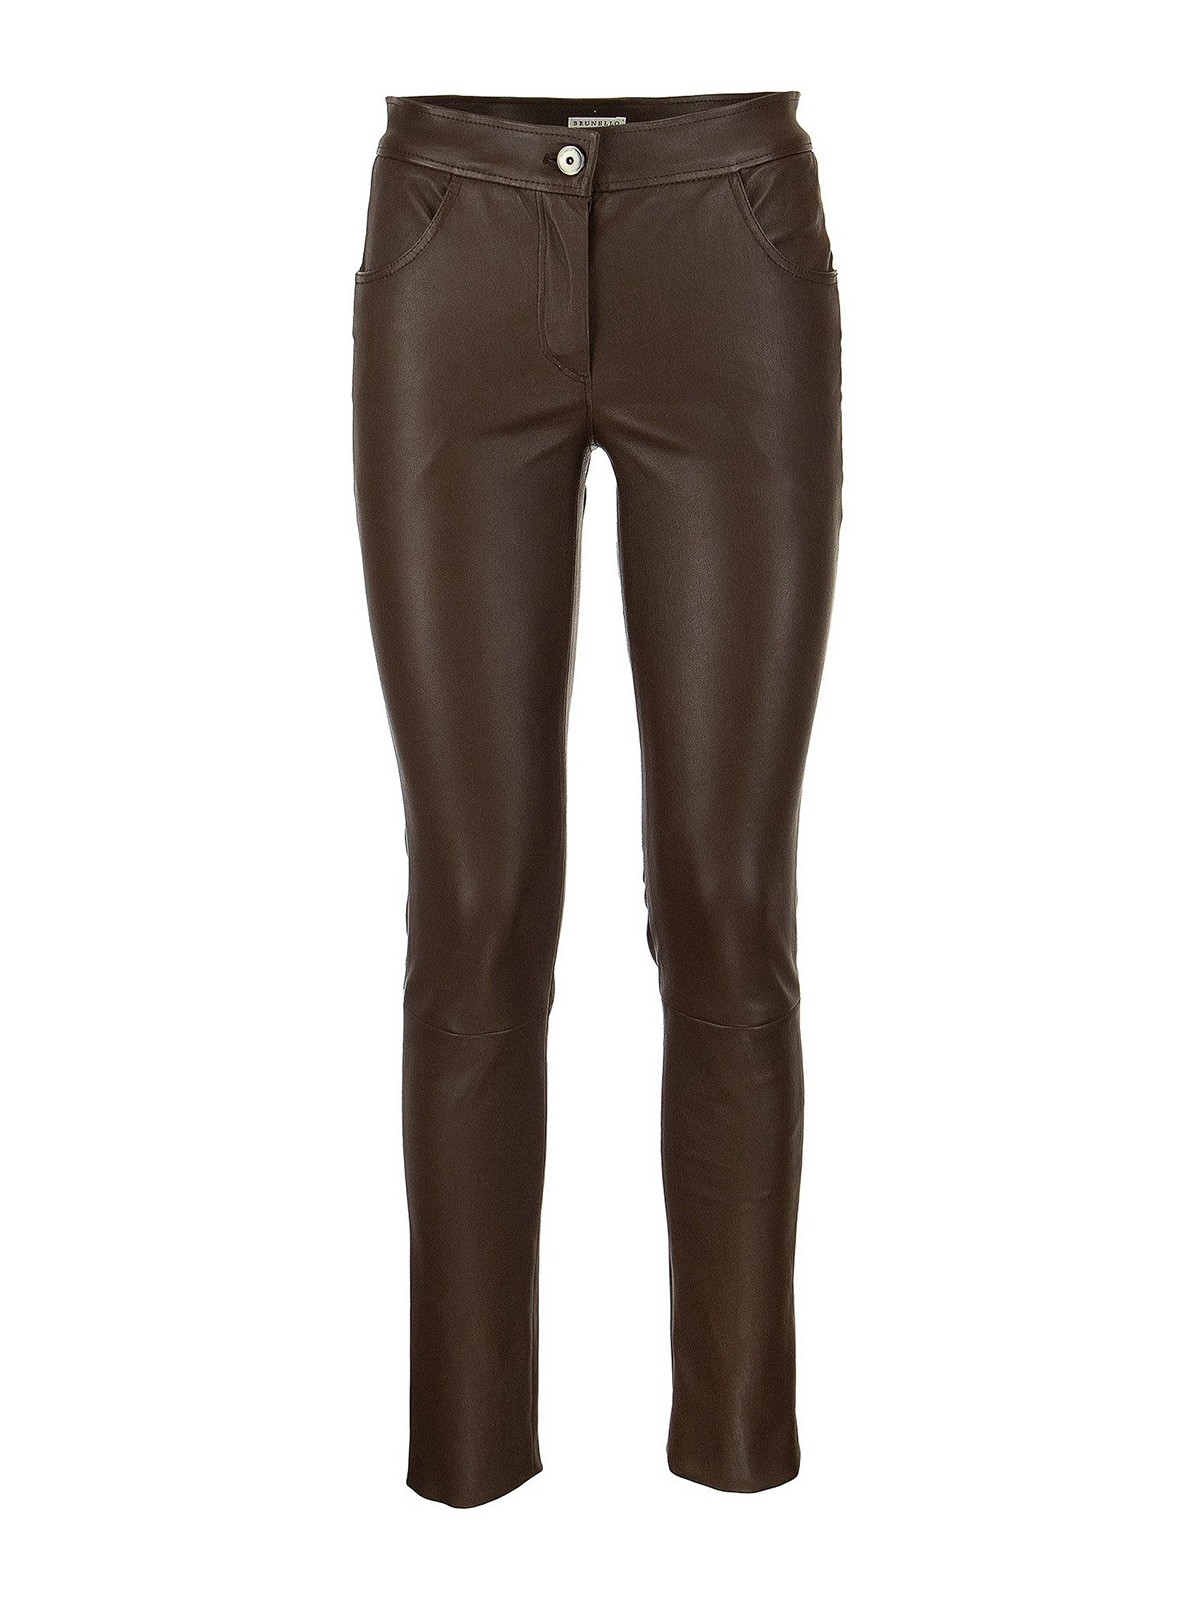 L'AGENCE Ginny High Rise Back Zip Pants in Noir Coated – CoatTails